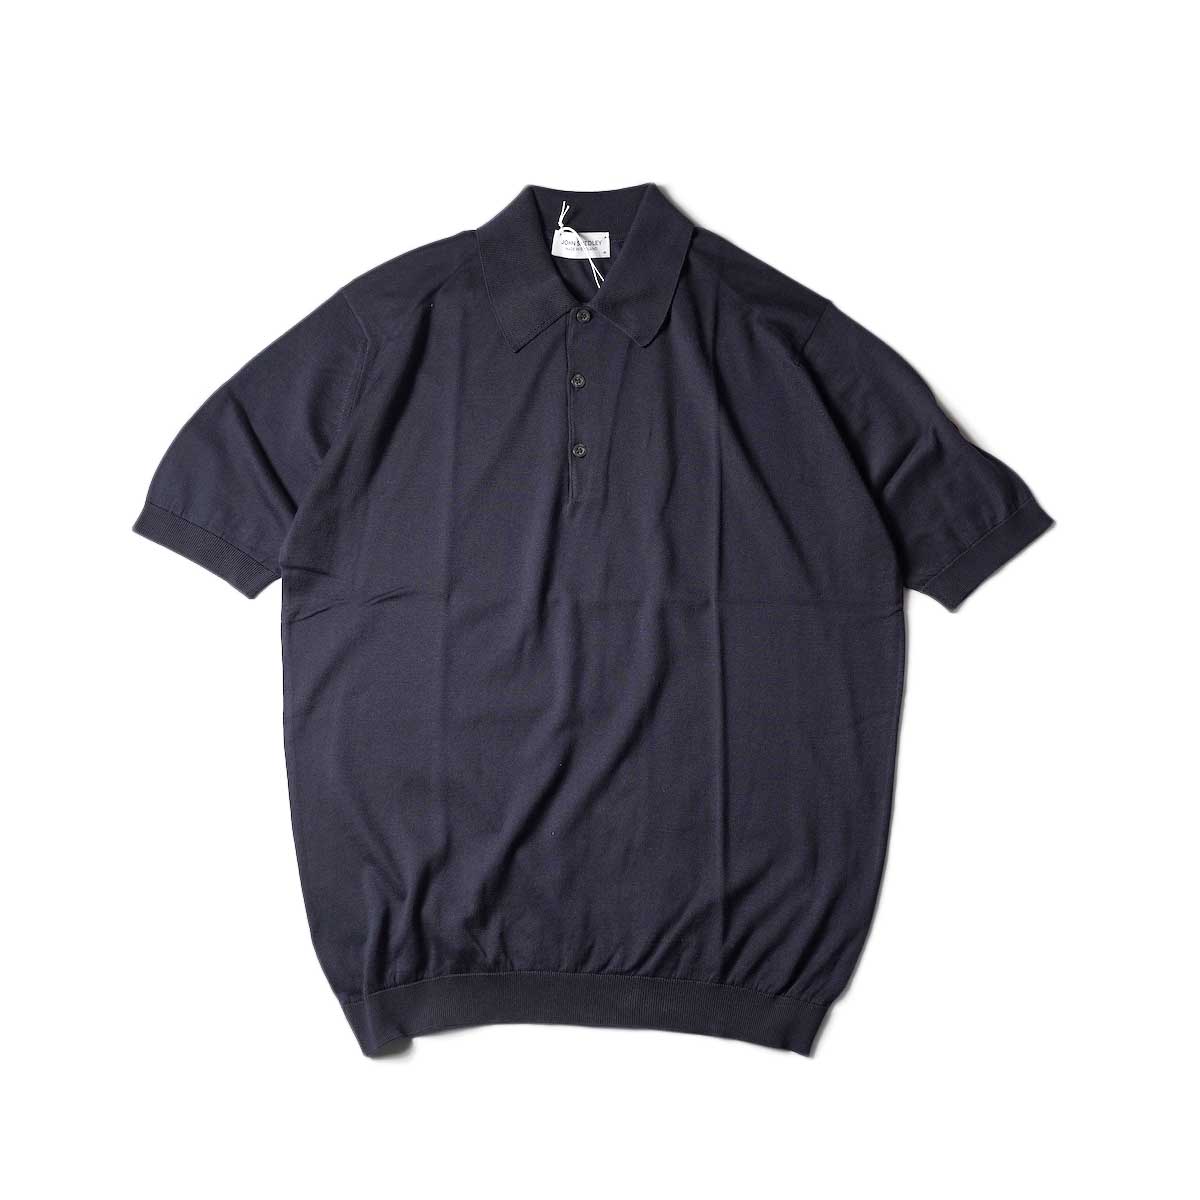 JOHN SMEDLEY / ISIS S/S Knit Polo (Navy)正面